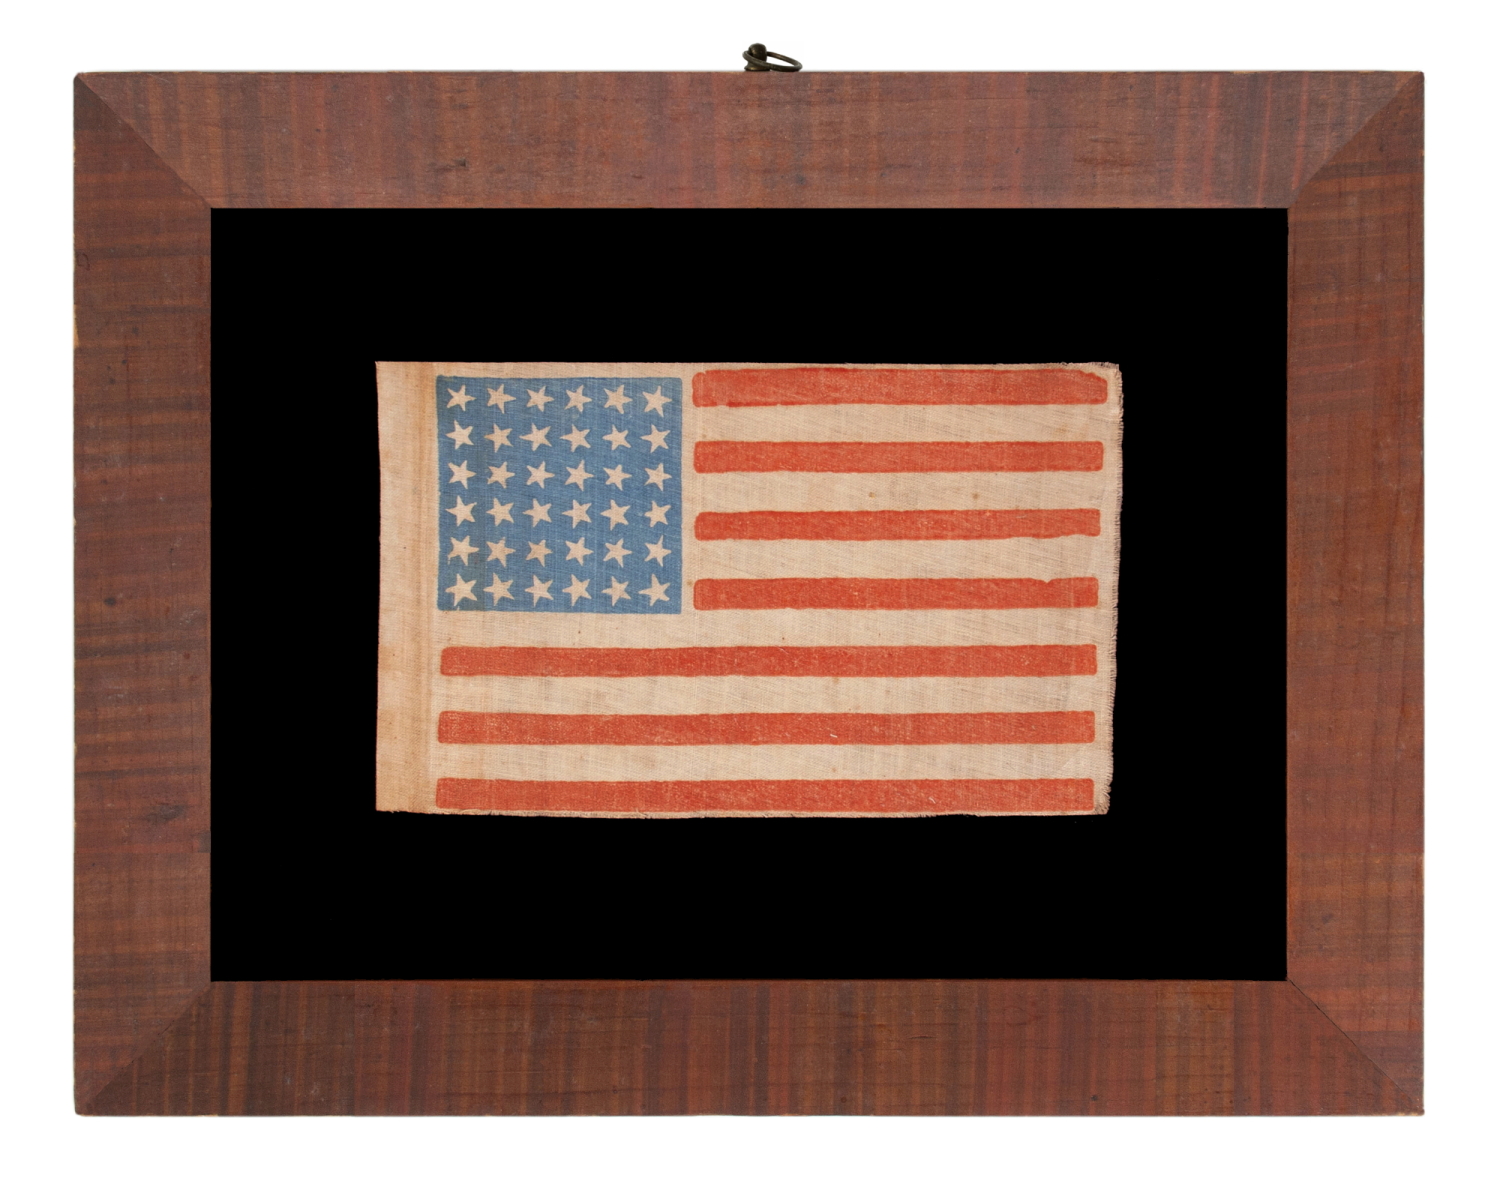 36 STAR ANTIQUE AMERICAN PARADE FLAG WITH CANTED STARS IN DANCING ROWS, ON A BEAUTIFUL, CORNFLOWER BLUE CANTON; CIVIL WAR ERA, NEVADA STATEHOOD, 1864-1867